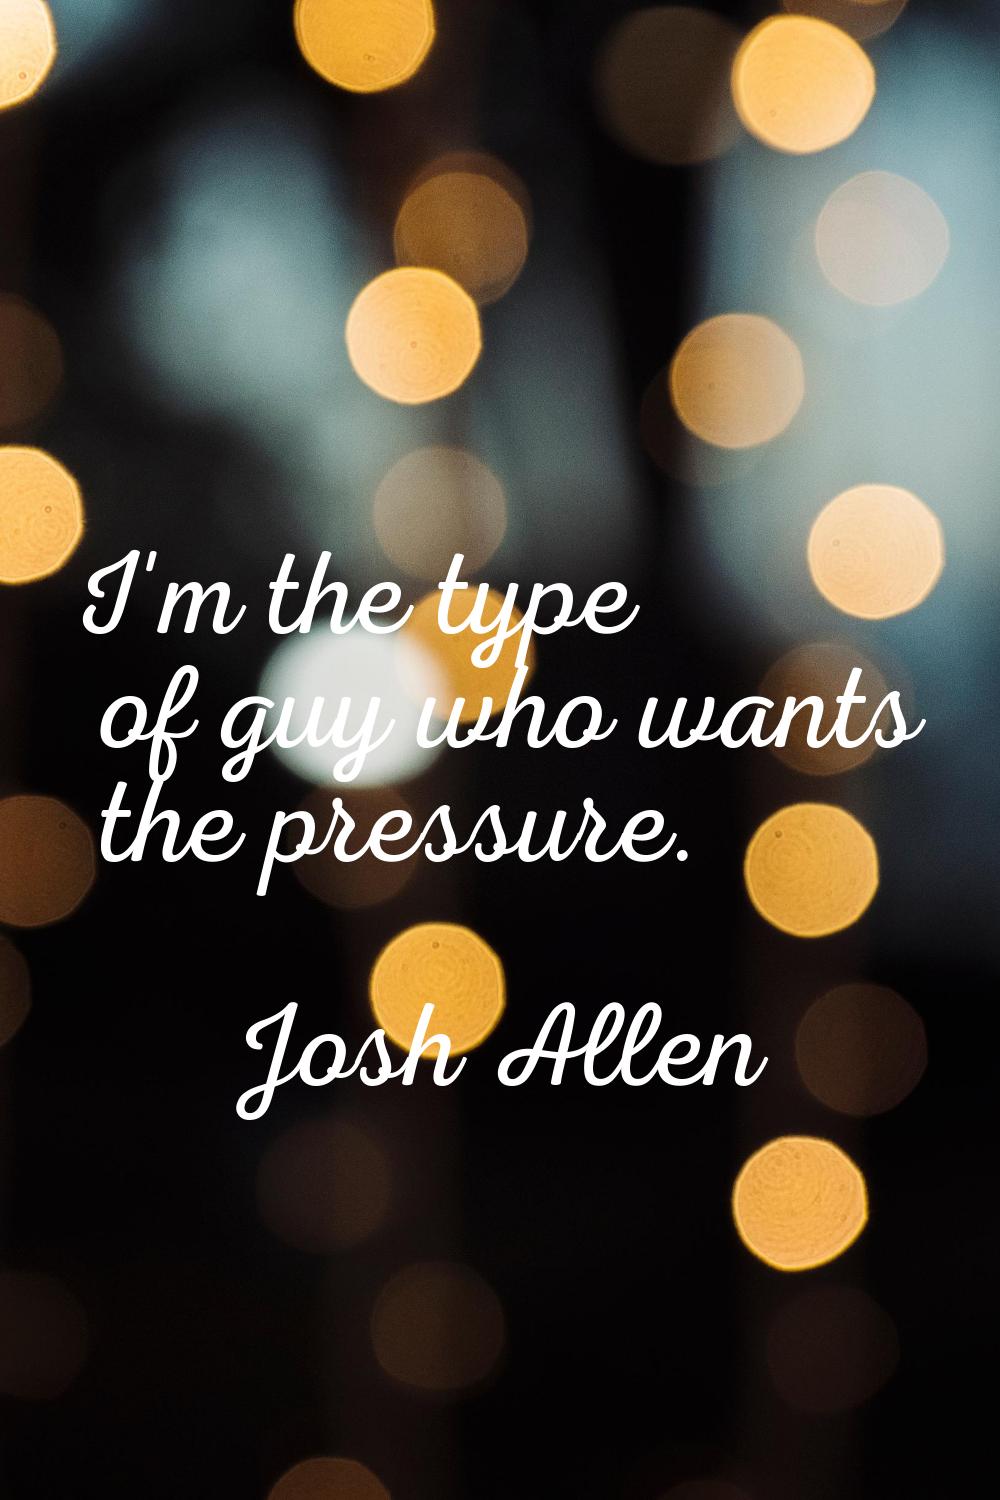 I'm the type of guy who wants the pressure.